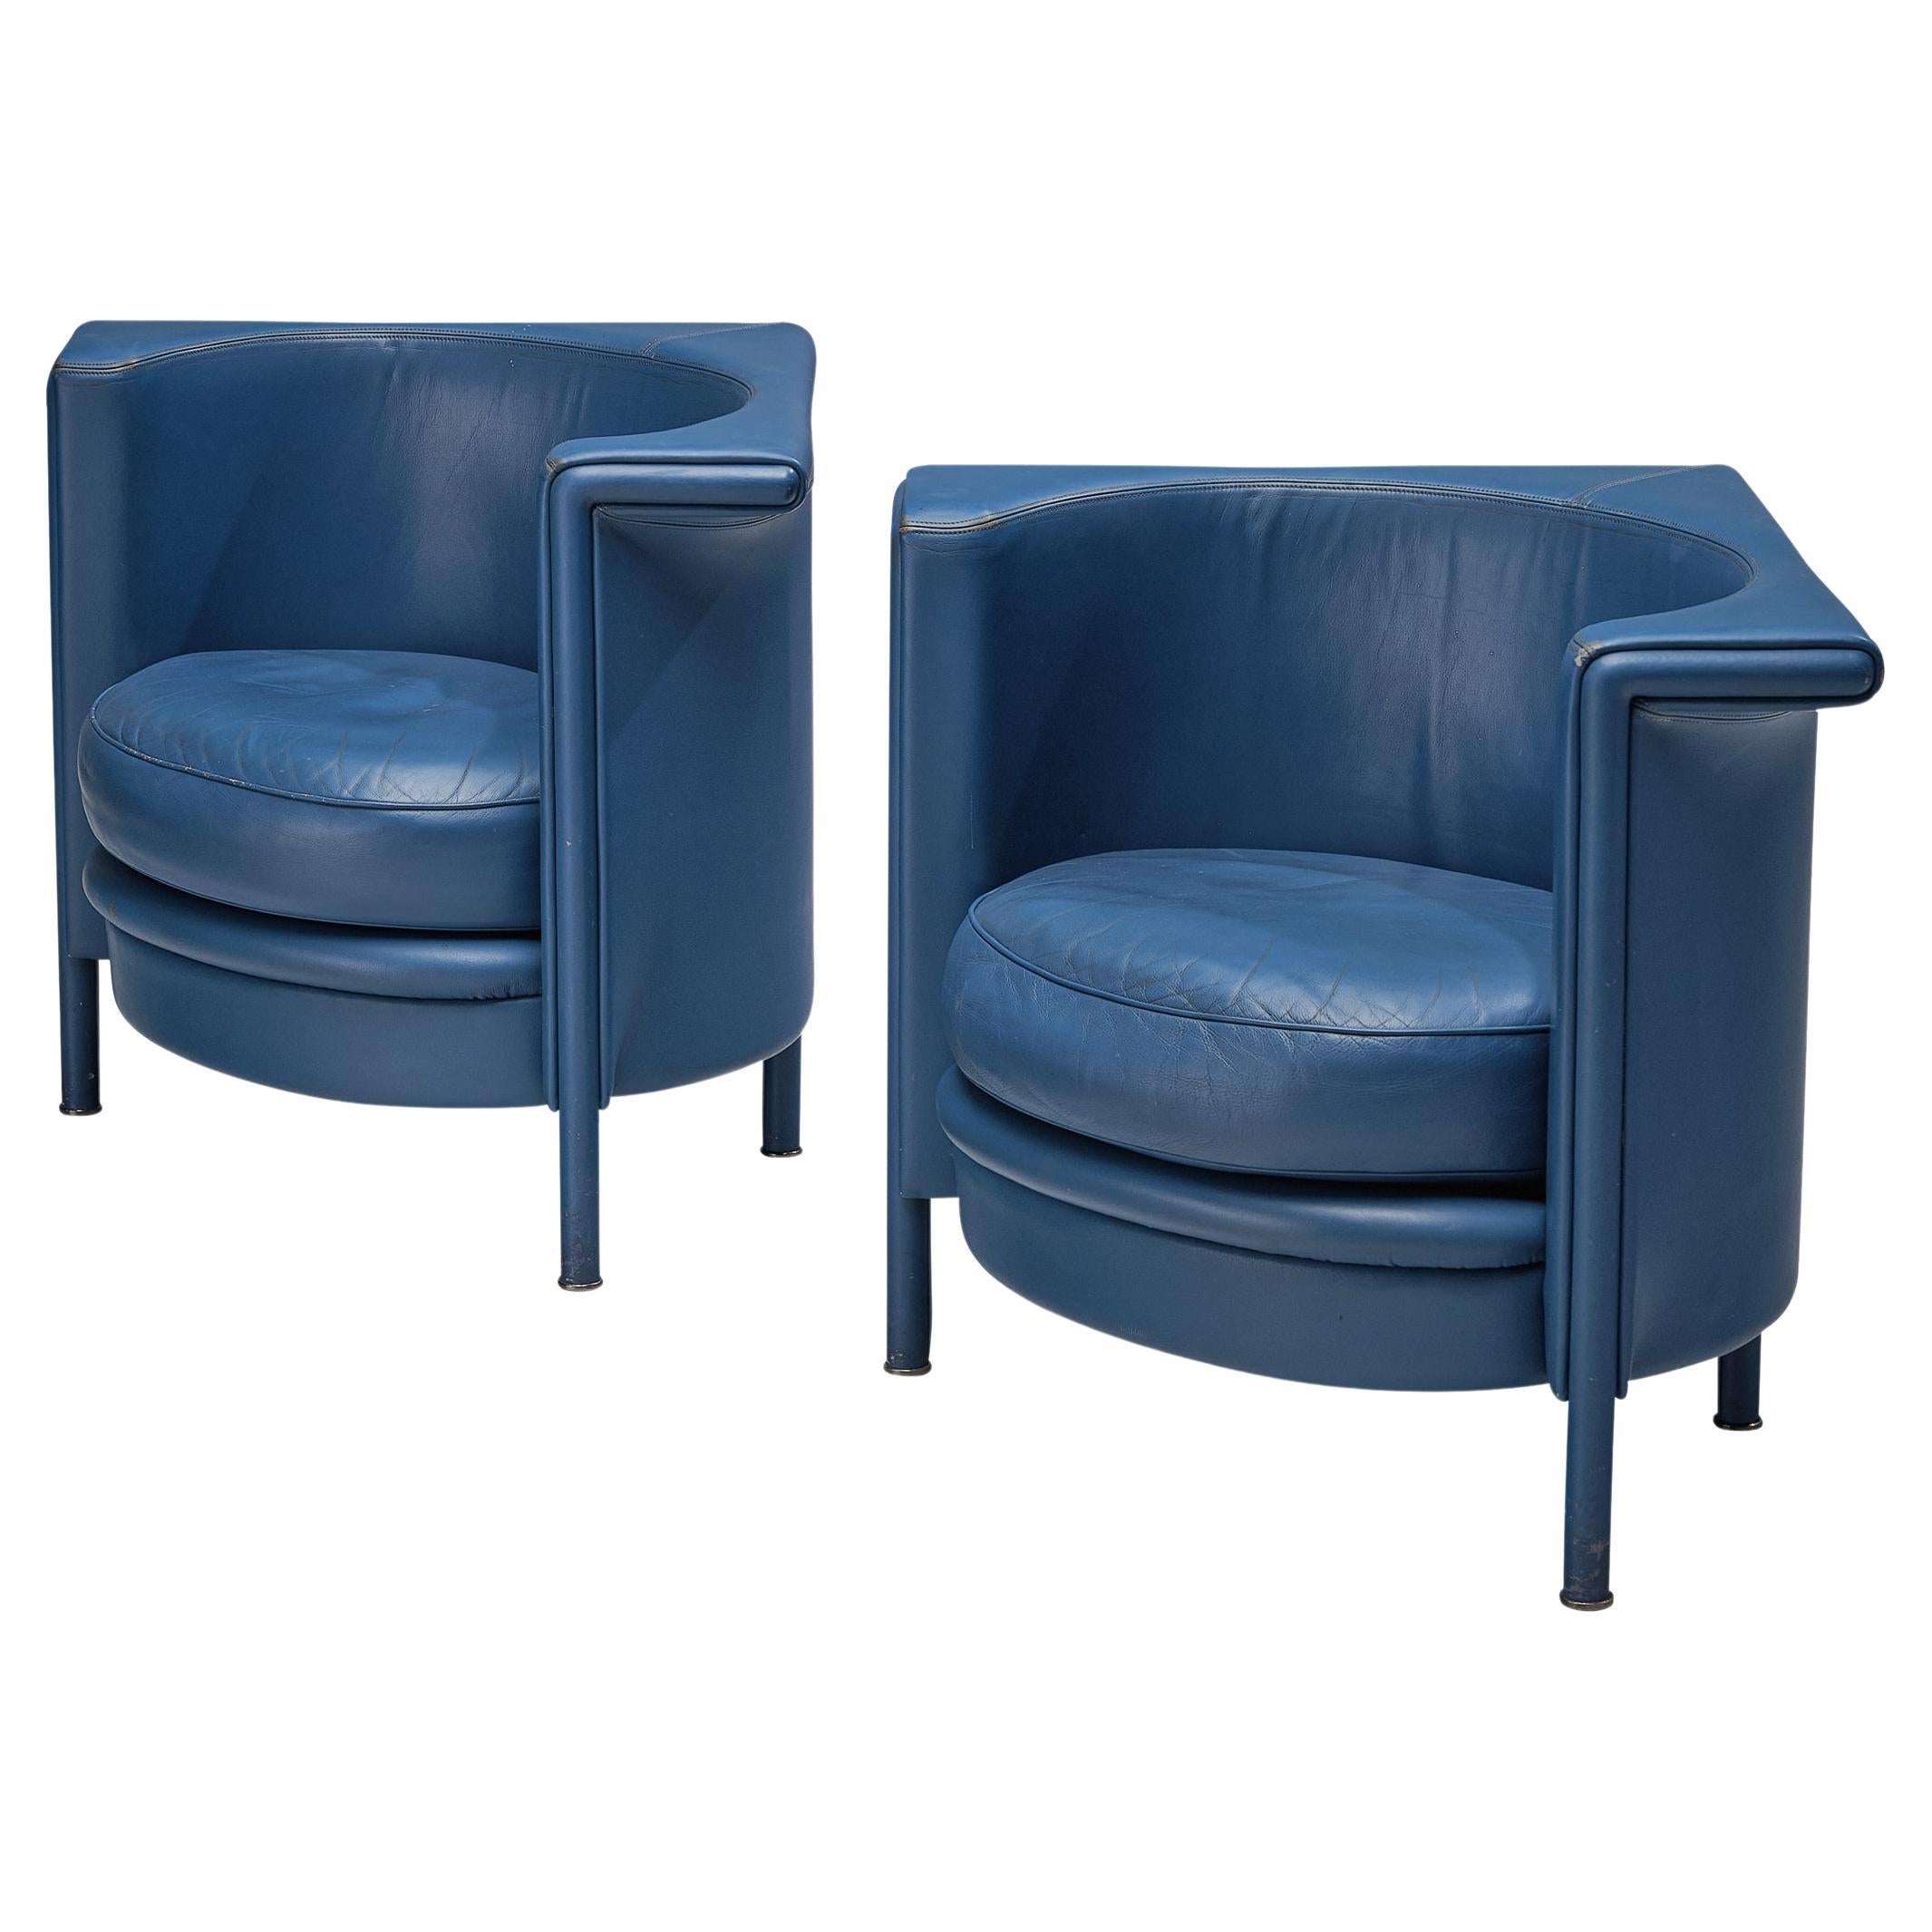 Antonio Citterio for Moroso Pair of Lounge Chairs in Blue Leather